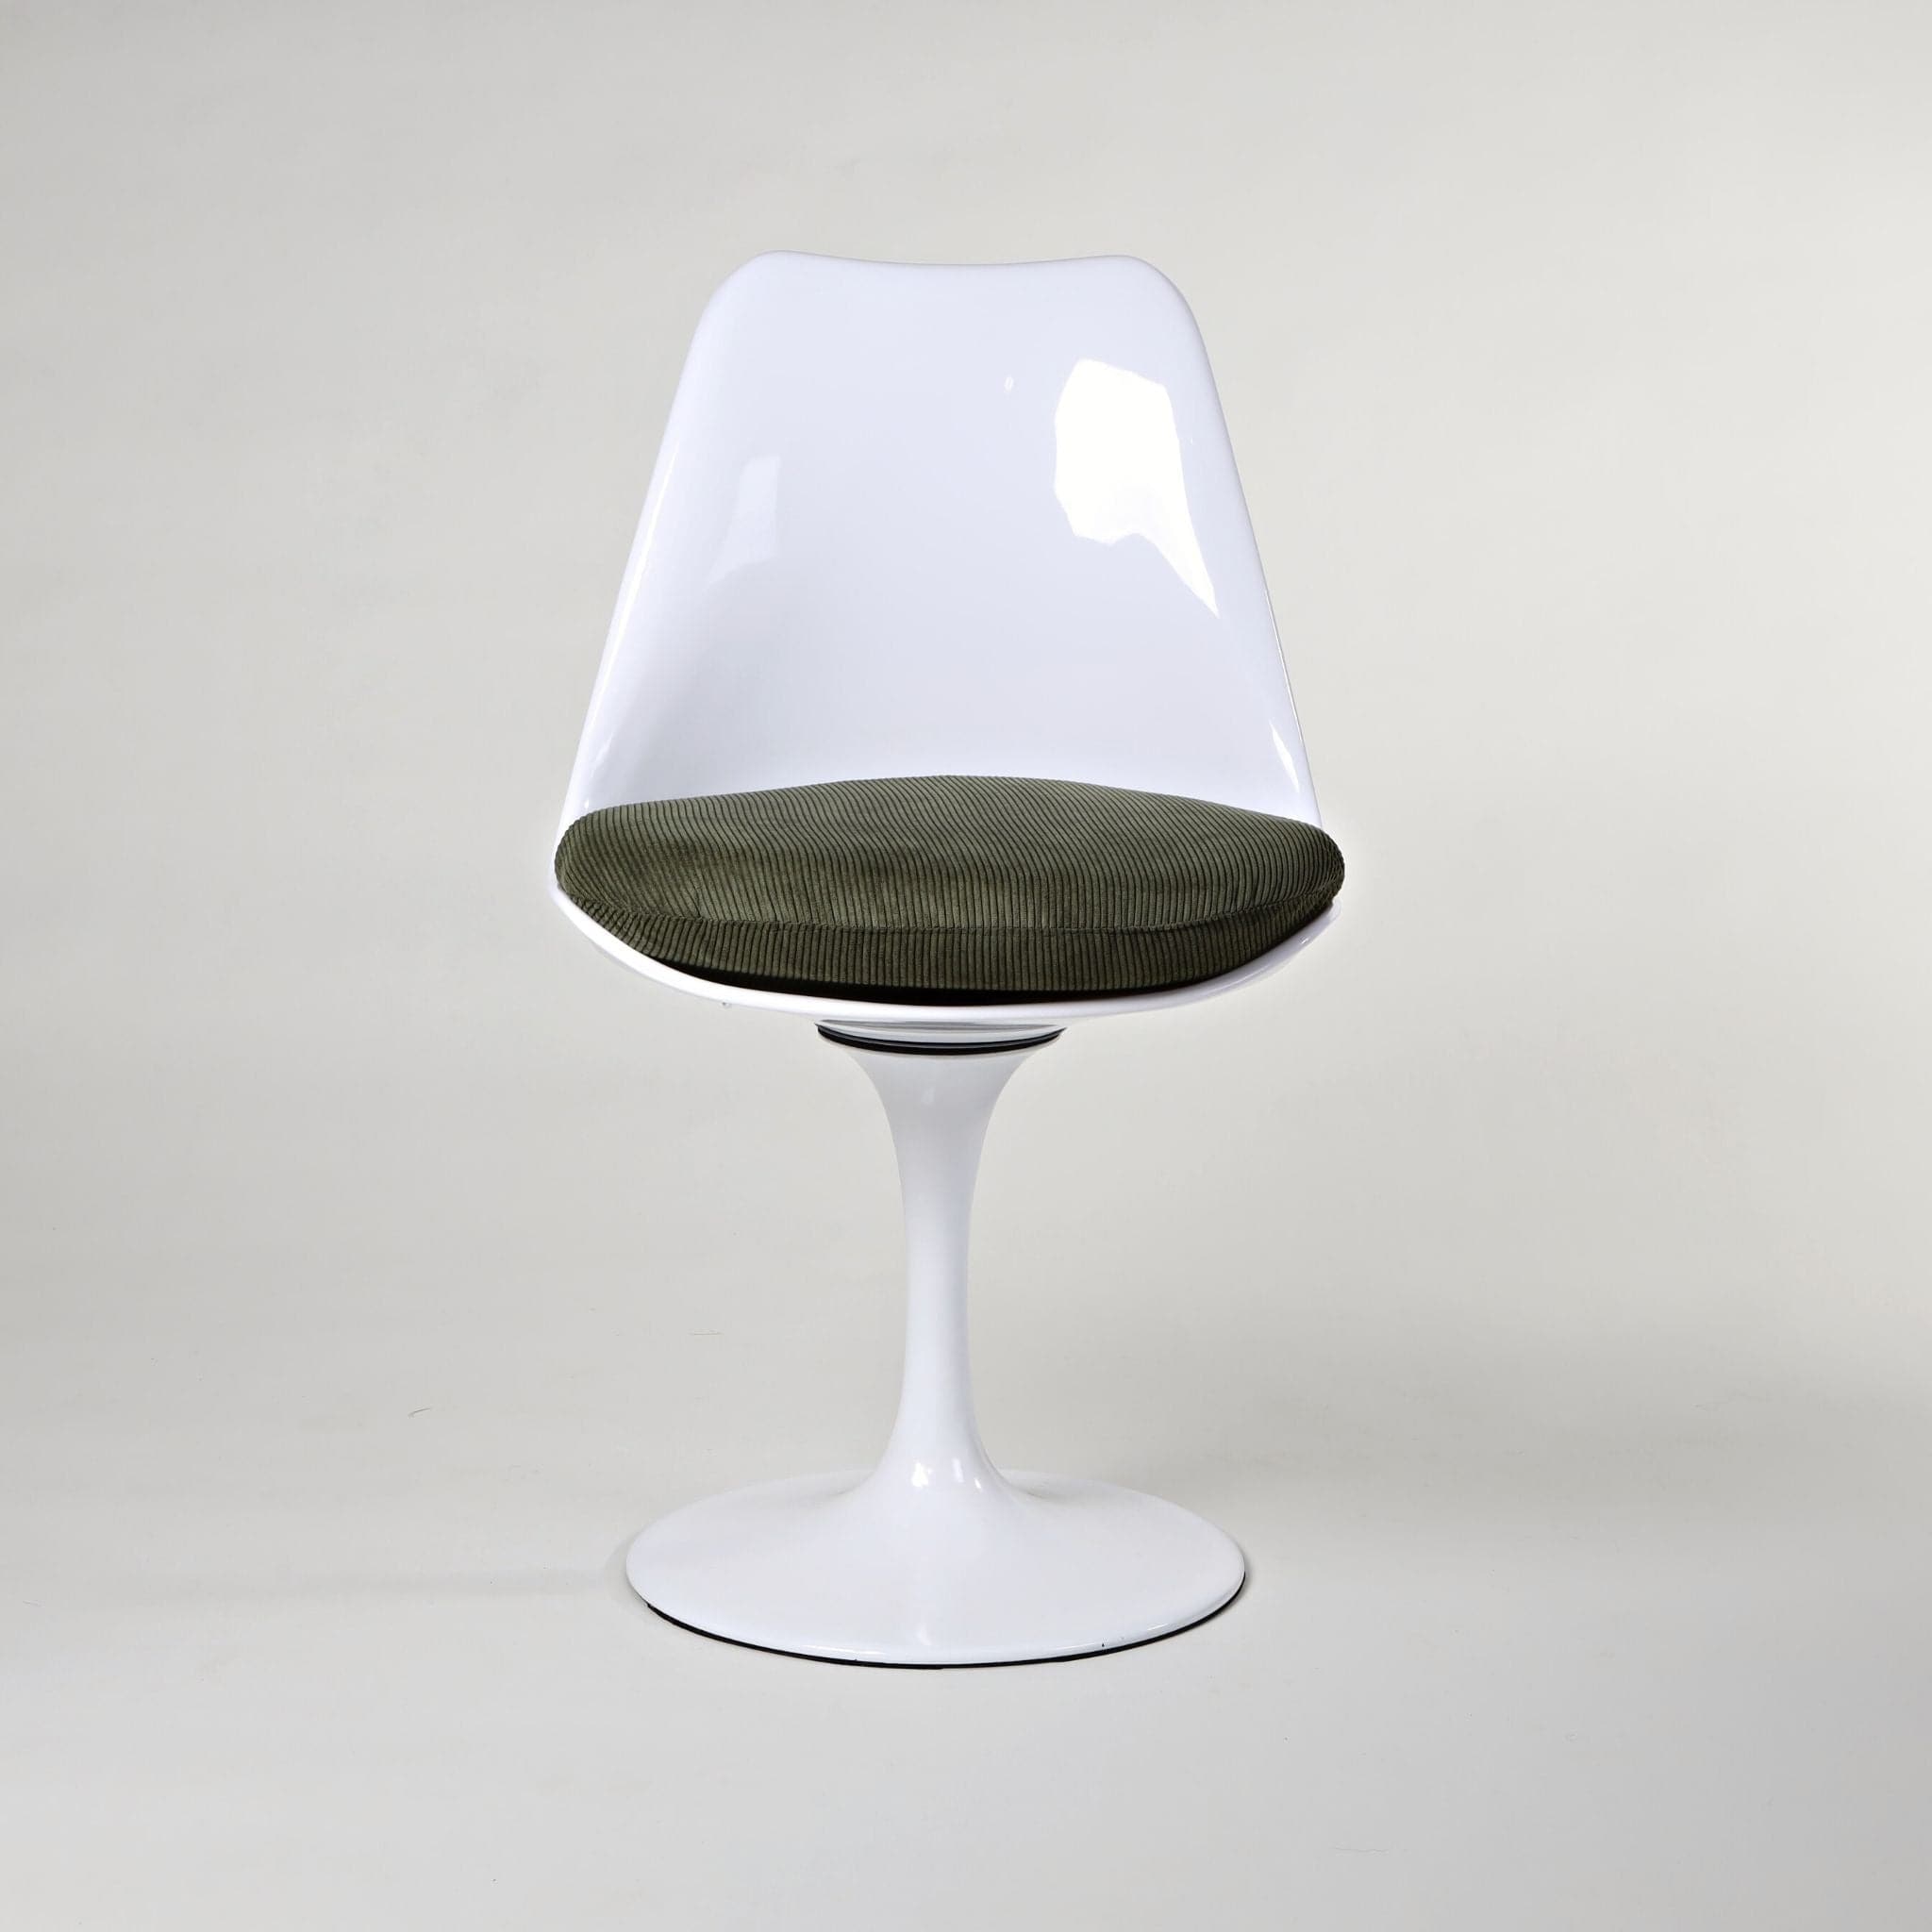 Clover Plastic Dining Chair The Feelter